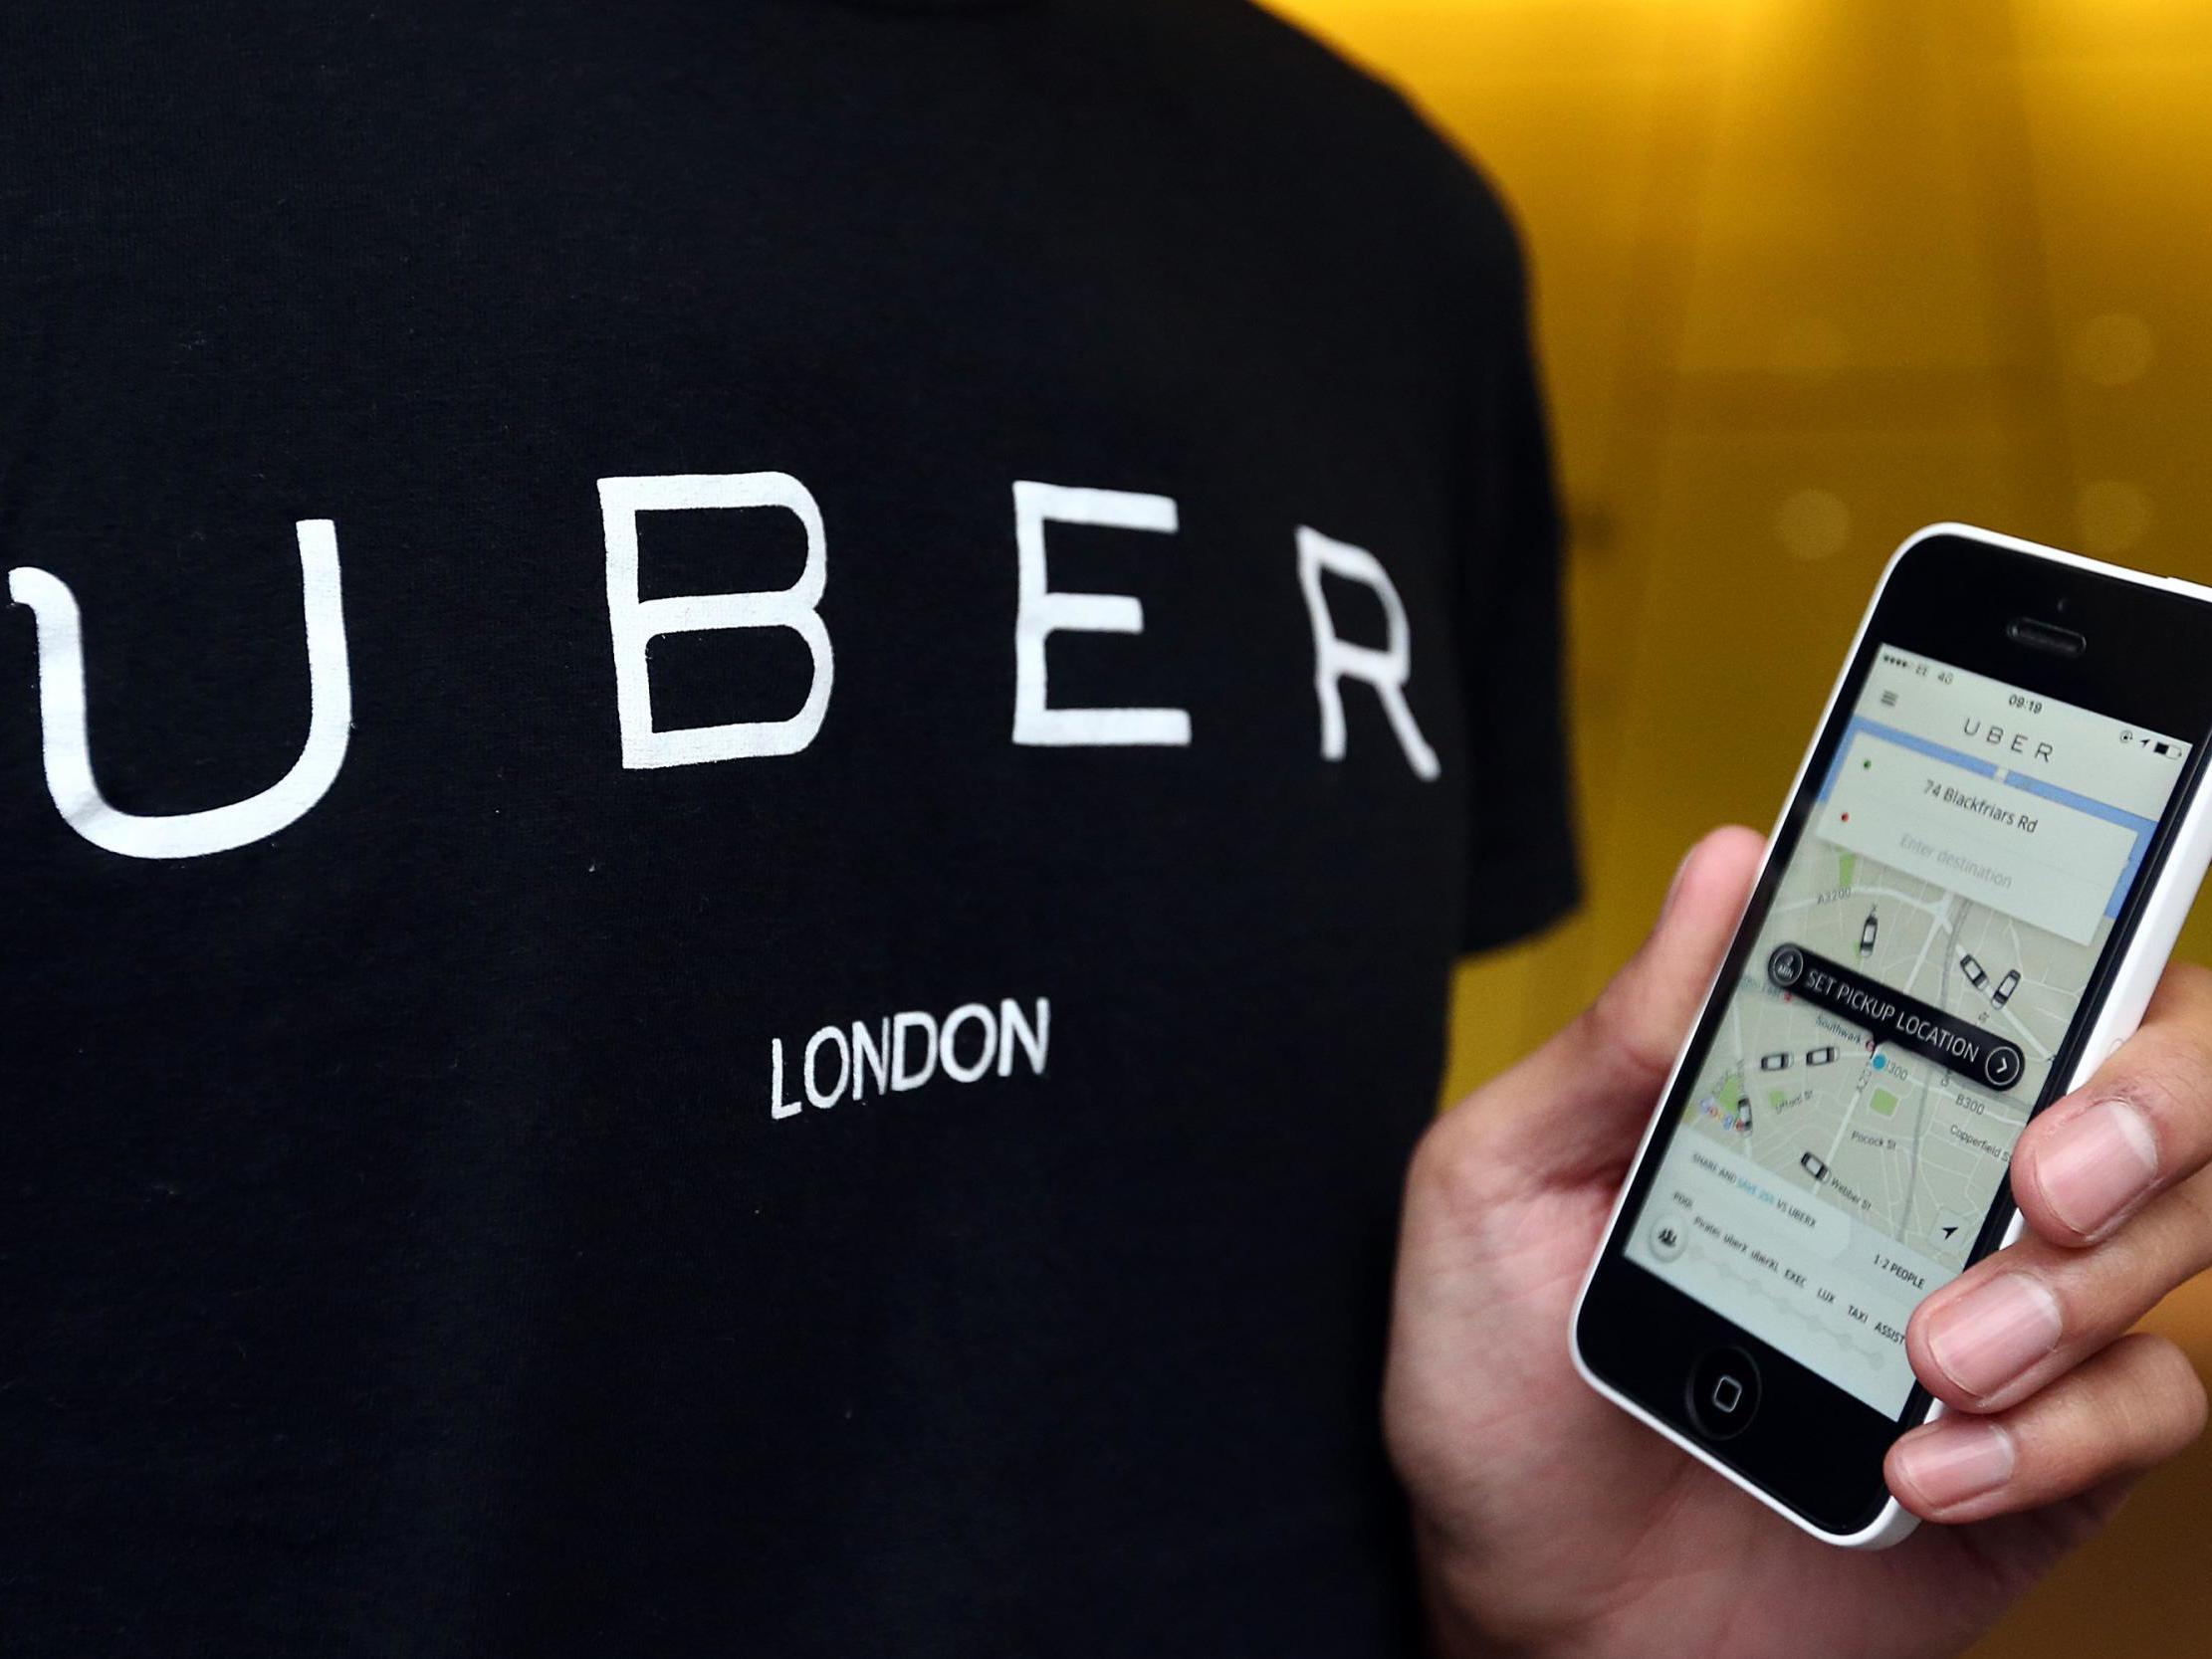 Mr Cooper said had 'never felt less safe as a gay person' after allegedly being discriminated against by an Uber driver